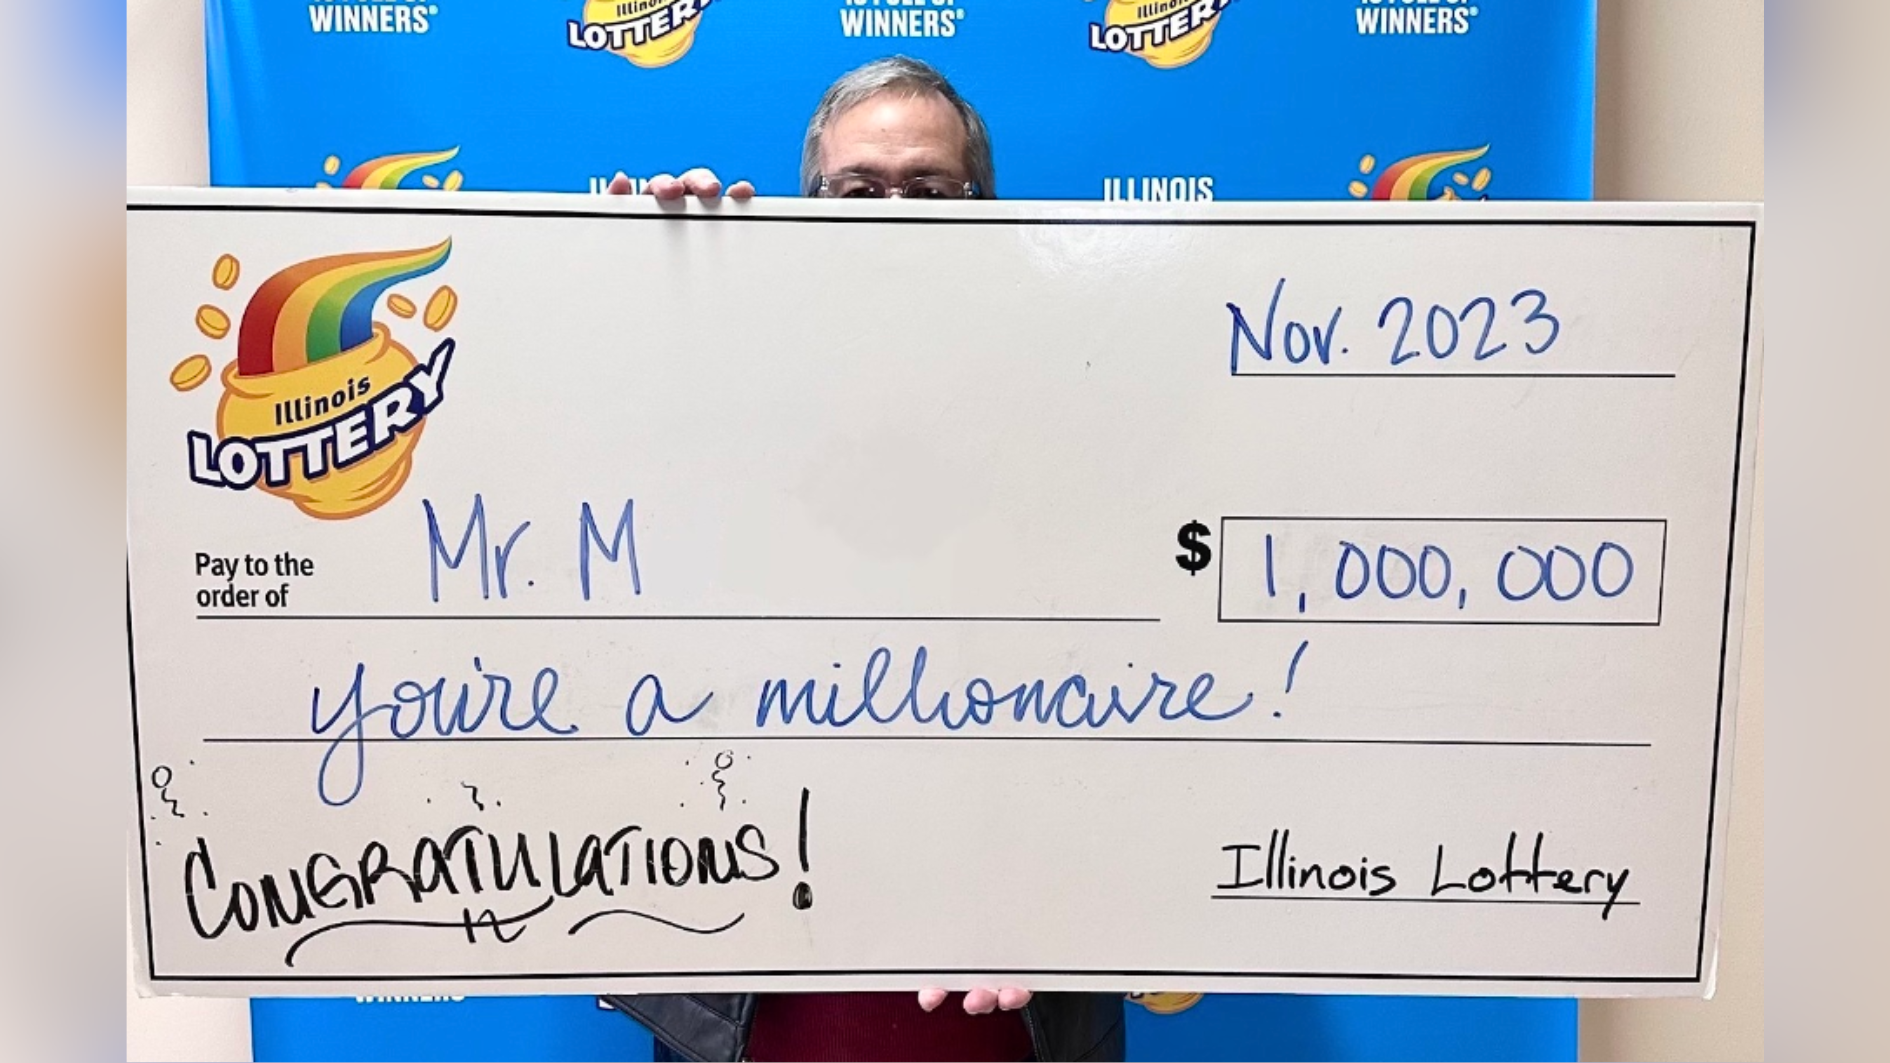 Man sets state record with $20 million scratch-off ticket: 'I'm a  millionaire